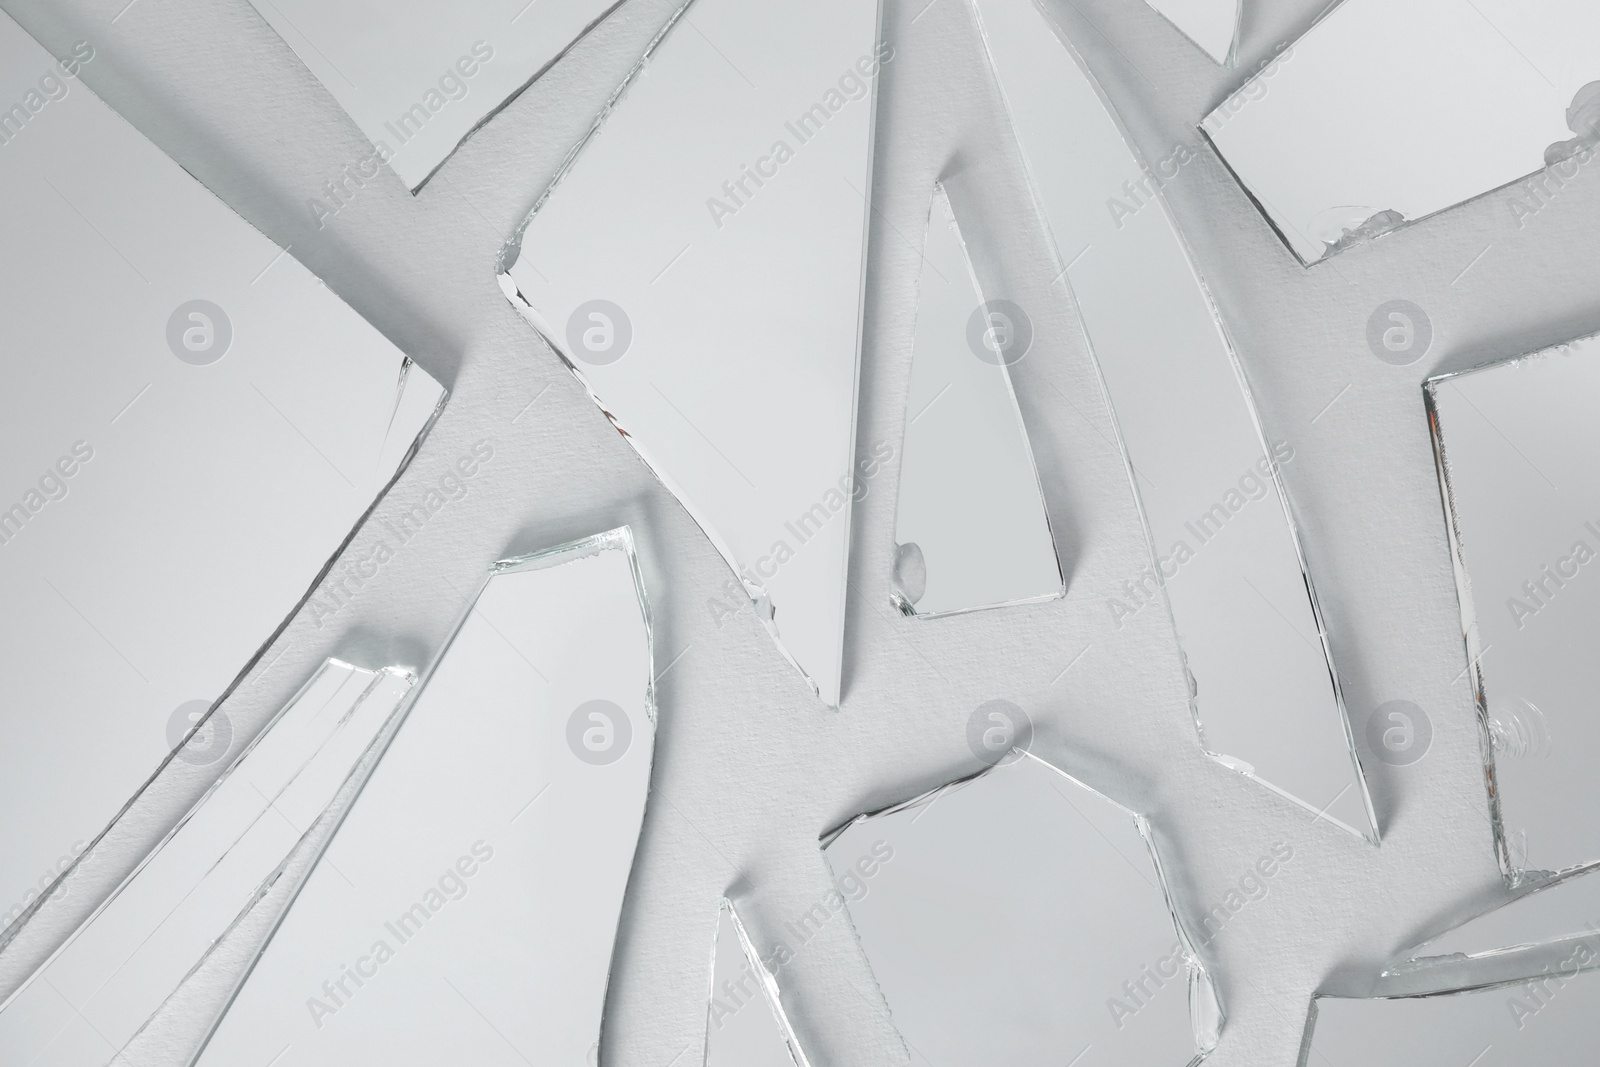 Photo of Shards of broken mirror on white background, top view